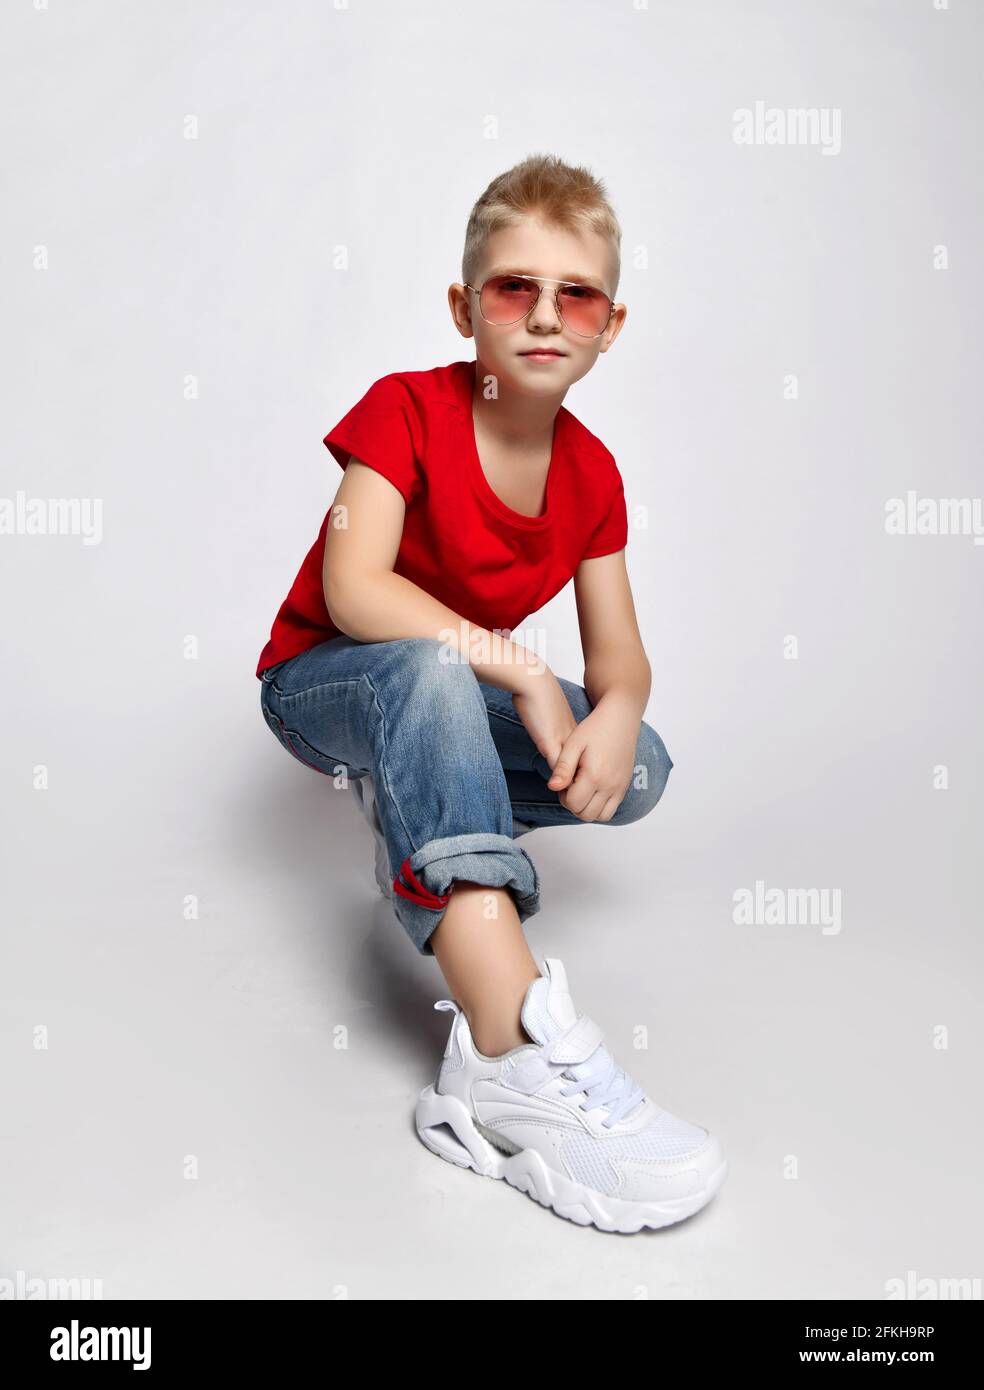 Self-confident blond kid boy in red t-shirt, blue jeans, sneakers and sunglasses sits squatted looking at camera Stock Photo